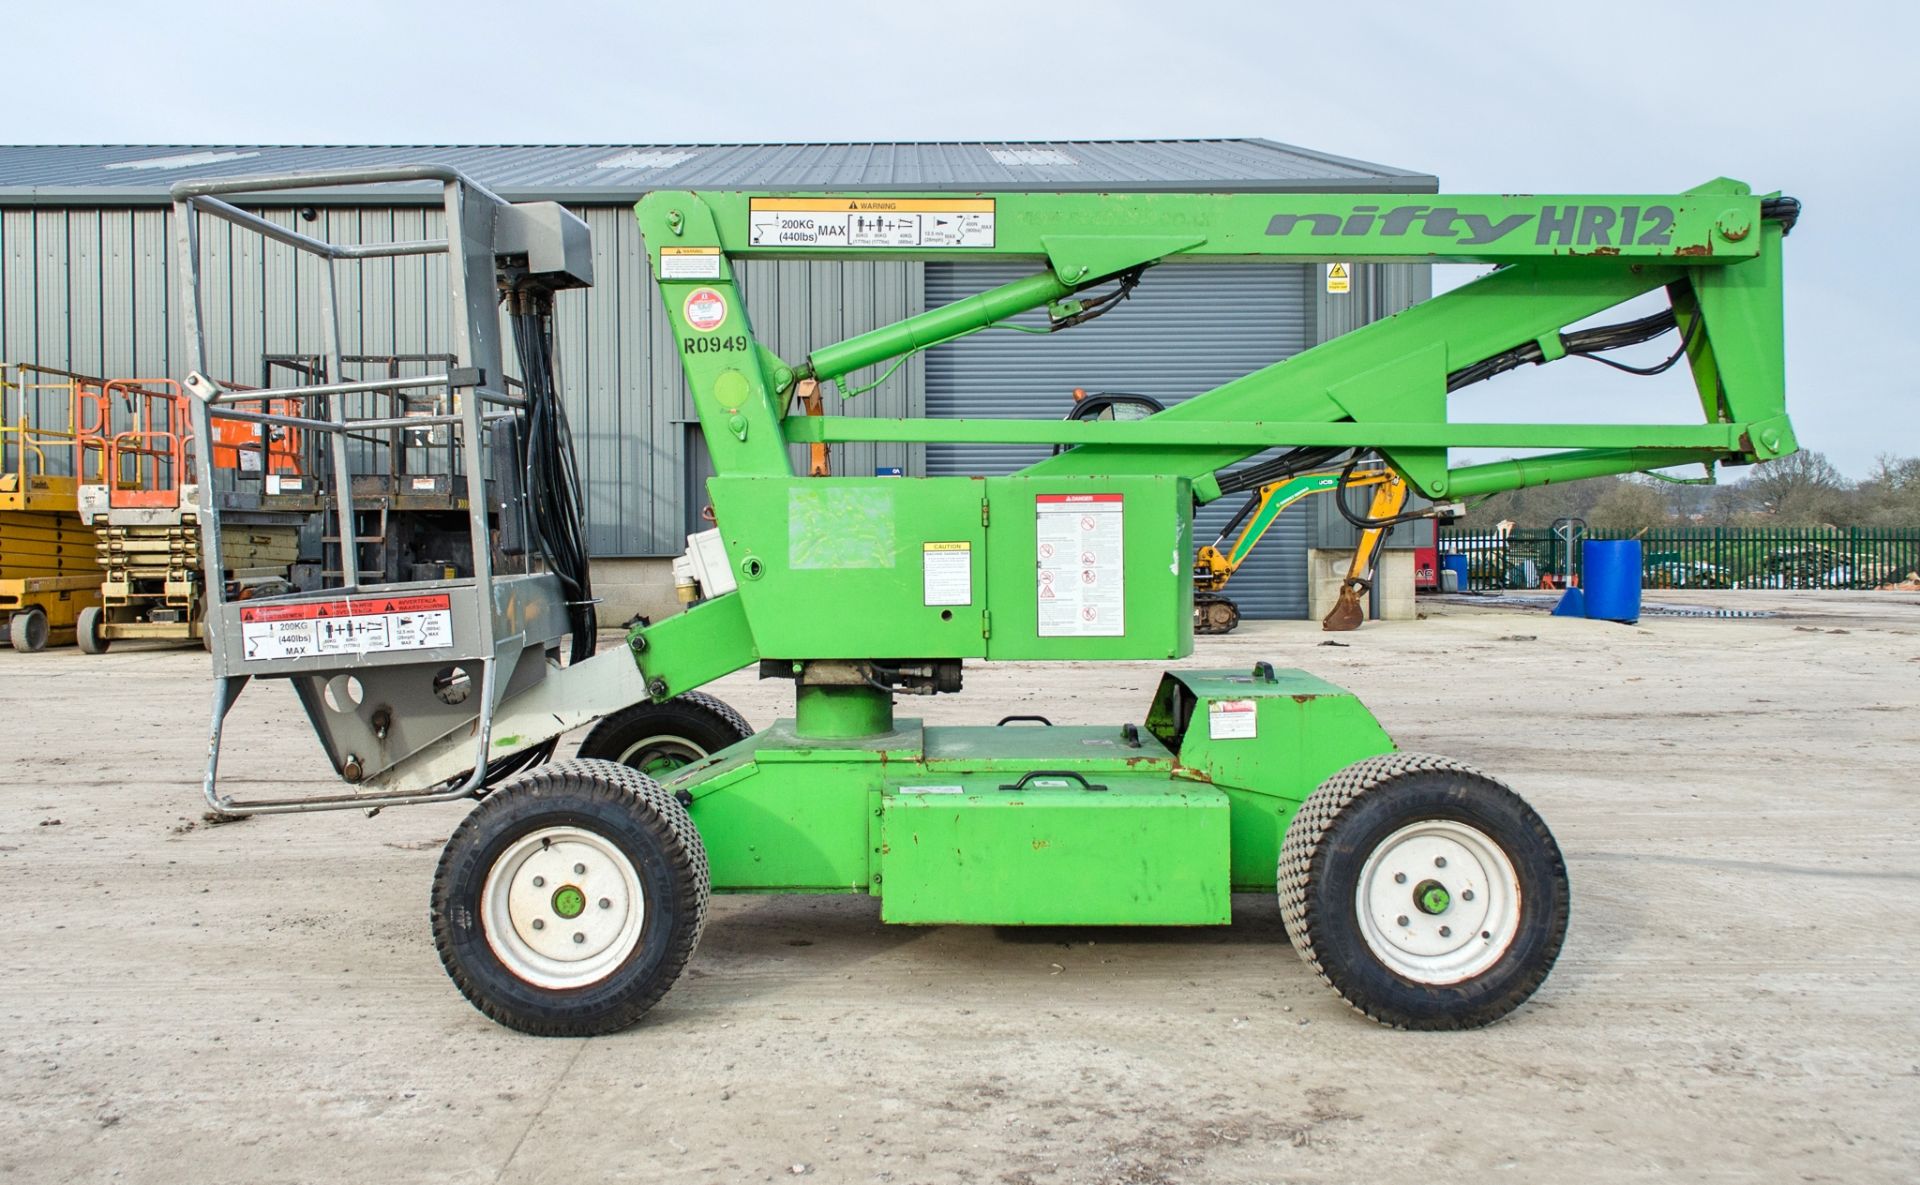 Nifty HR12 Heightrider battery electric/diesel articulated boom lift access platform Year: 2003 S/N: - Image 8 of 18